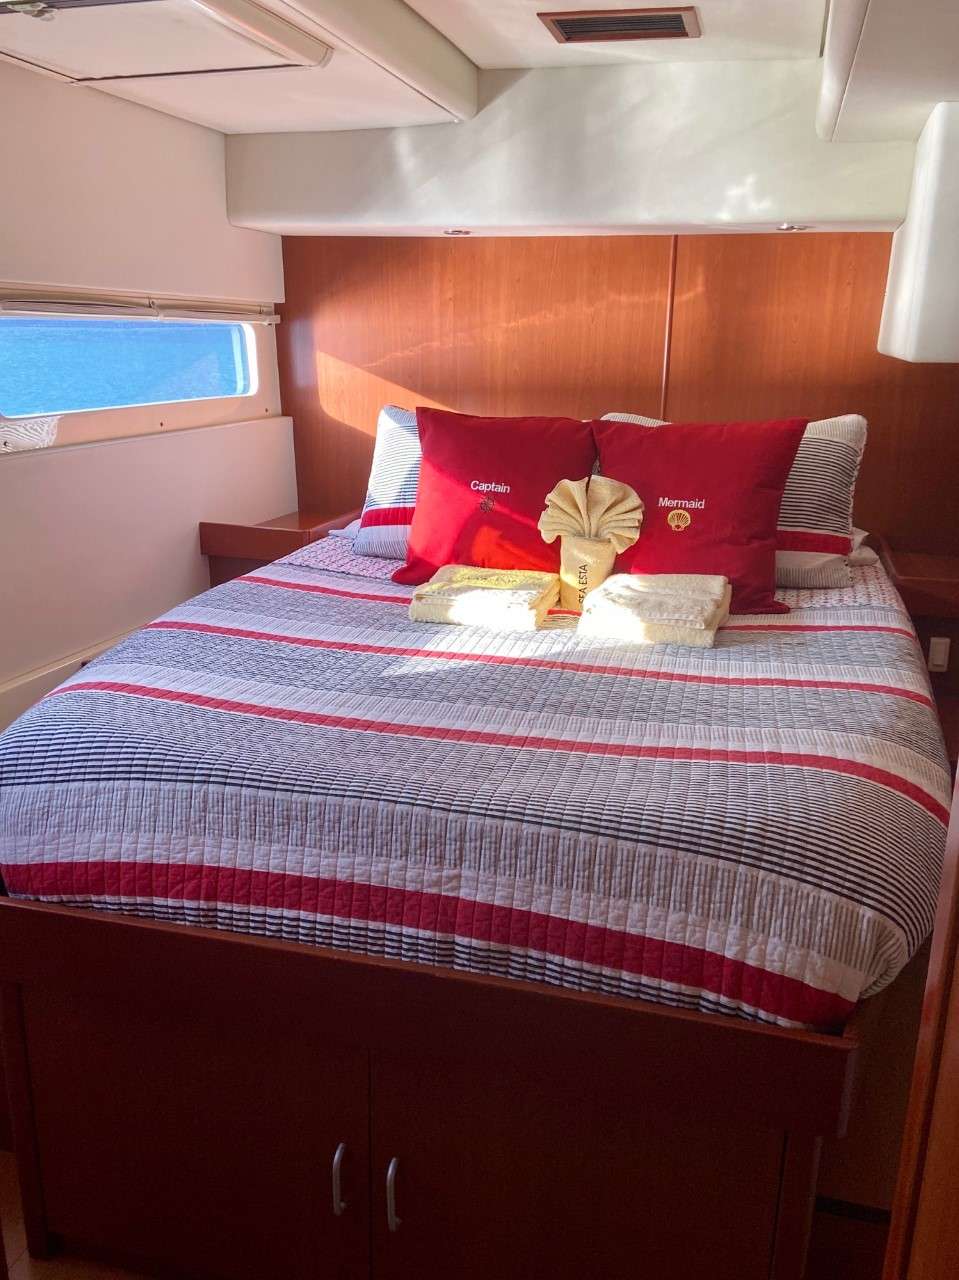  Have the best sleep ever as all staterooms provide cooling memory foam mattress toppers.